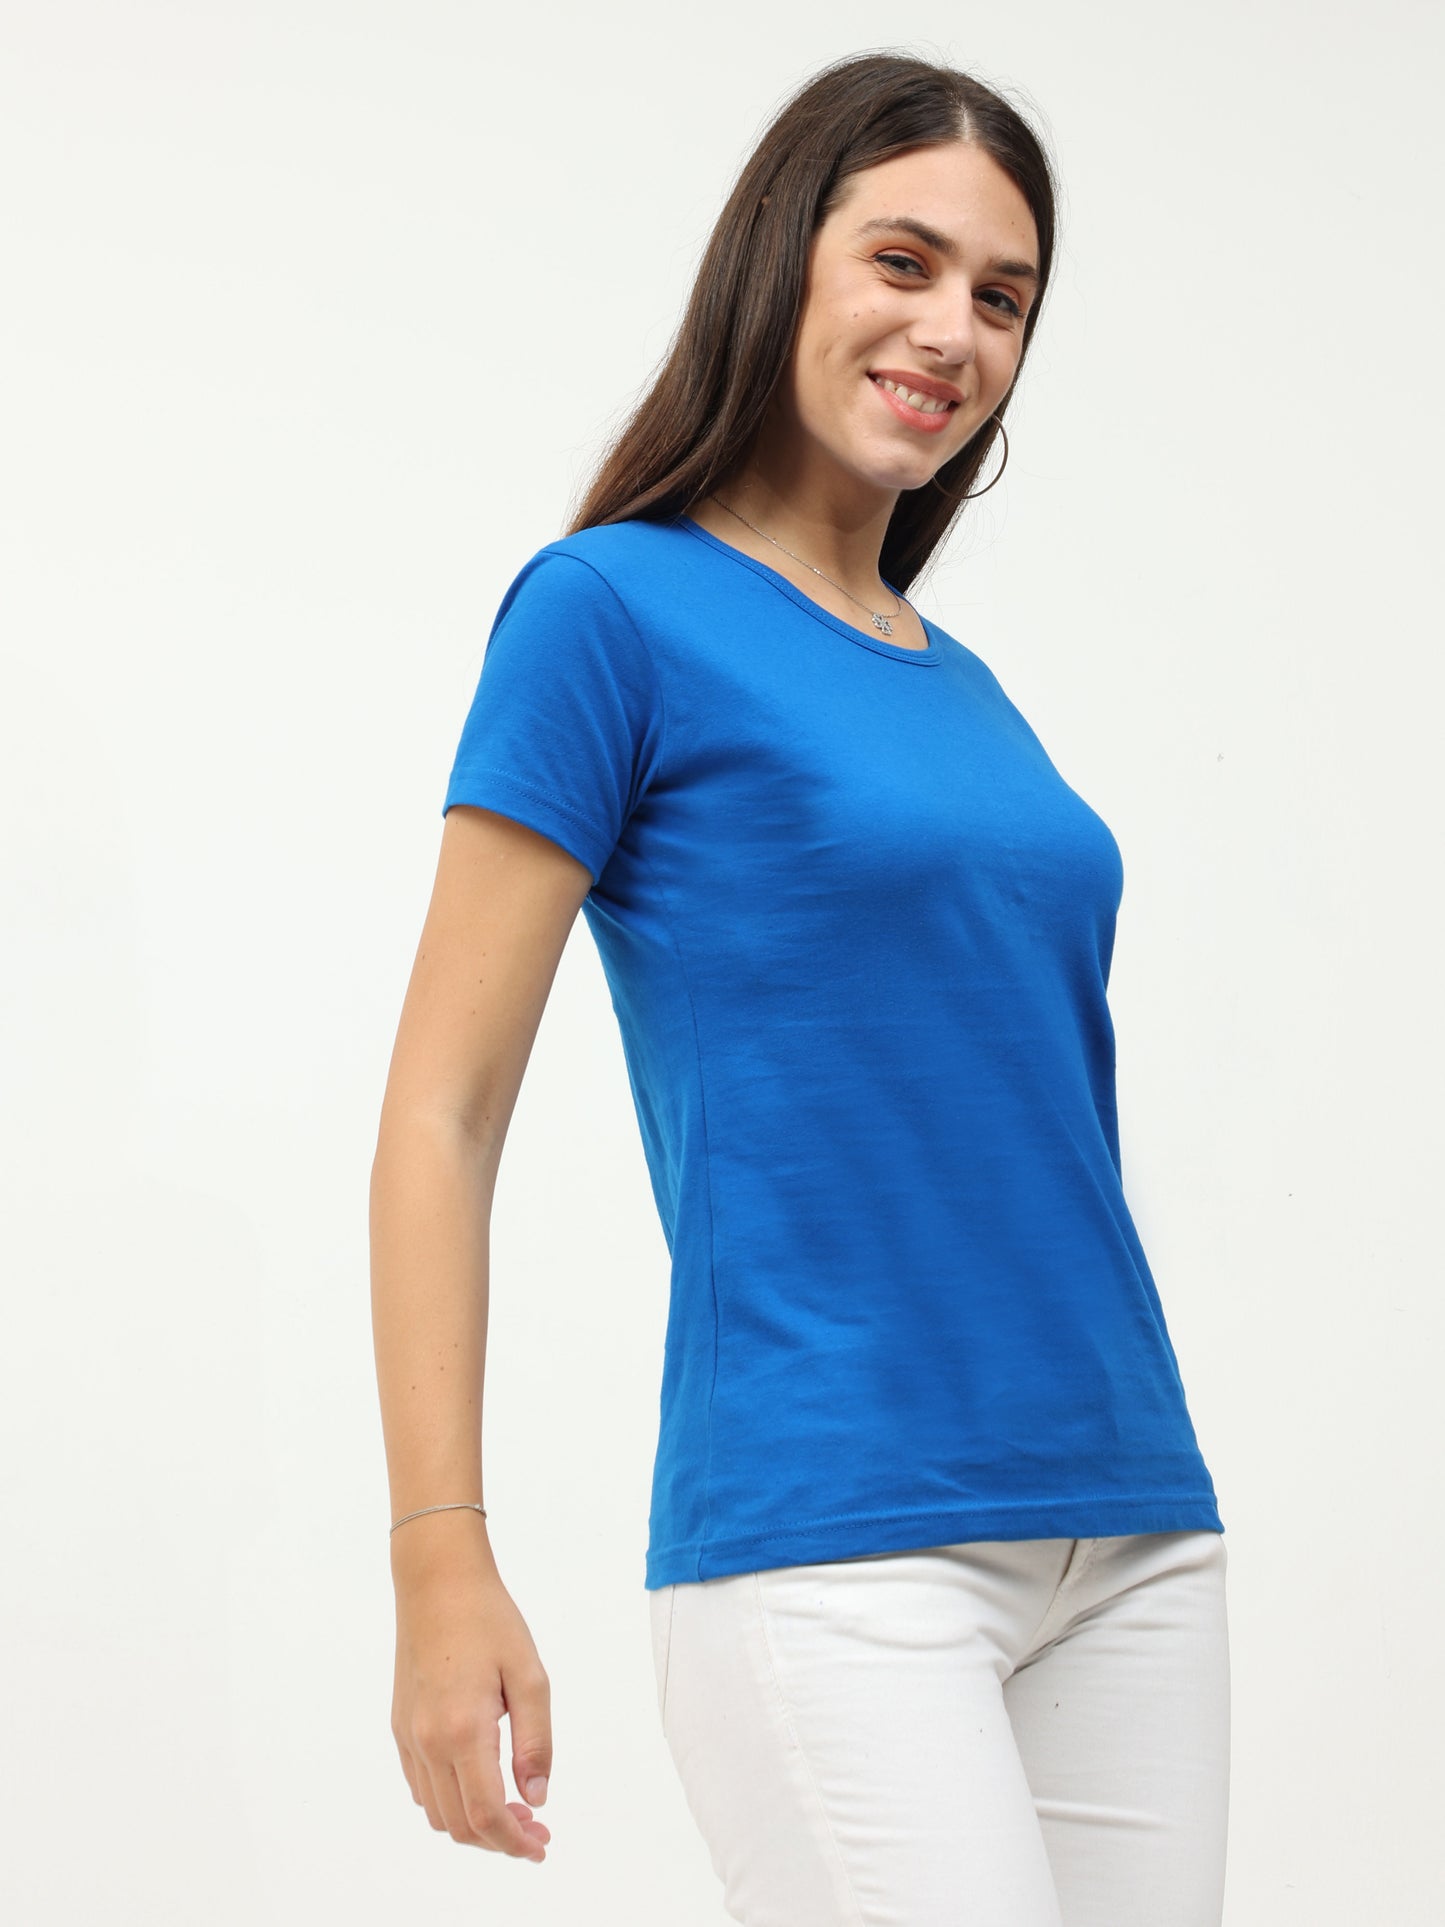 Women's Round Neck Half Sleeve T-Shirt Pick any  2, 4, 5, 8, 10 Pieces